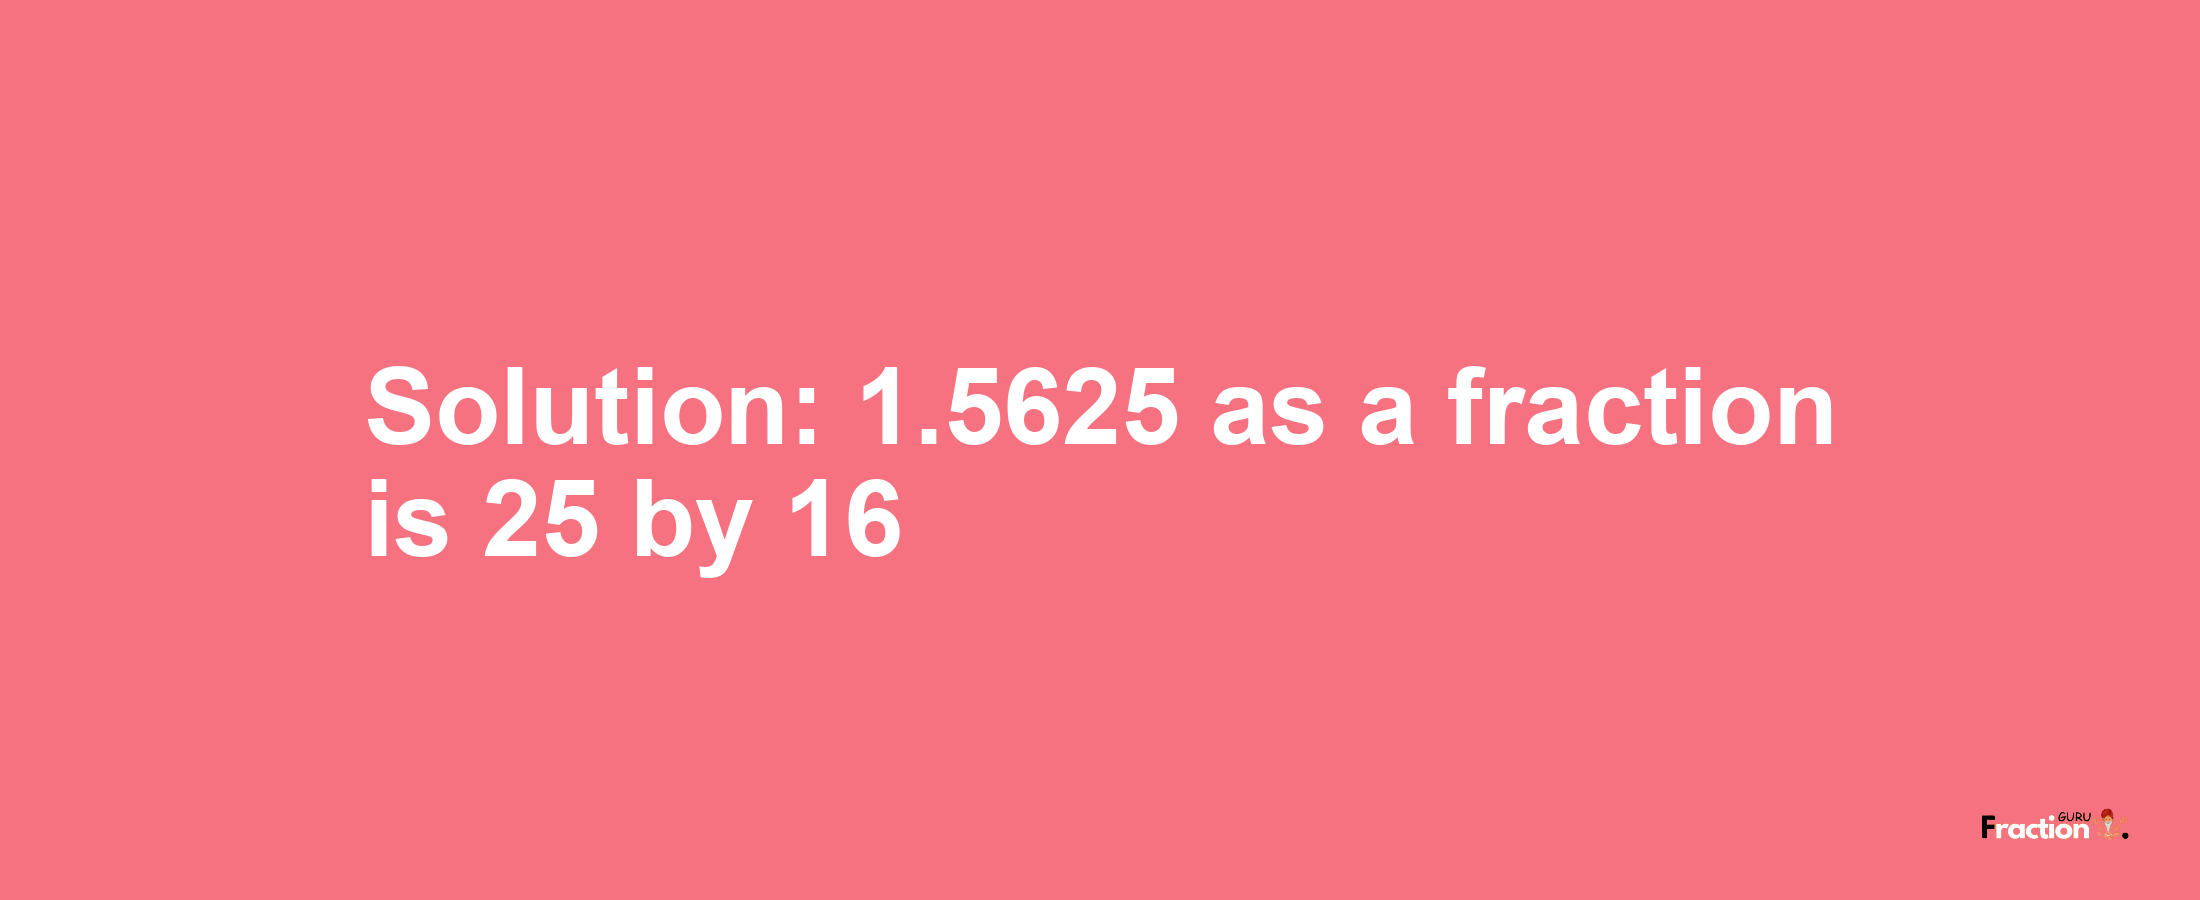 Solution:1.5625 as a fraction is 25/16